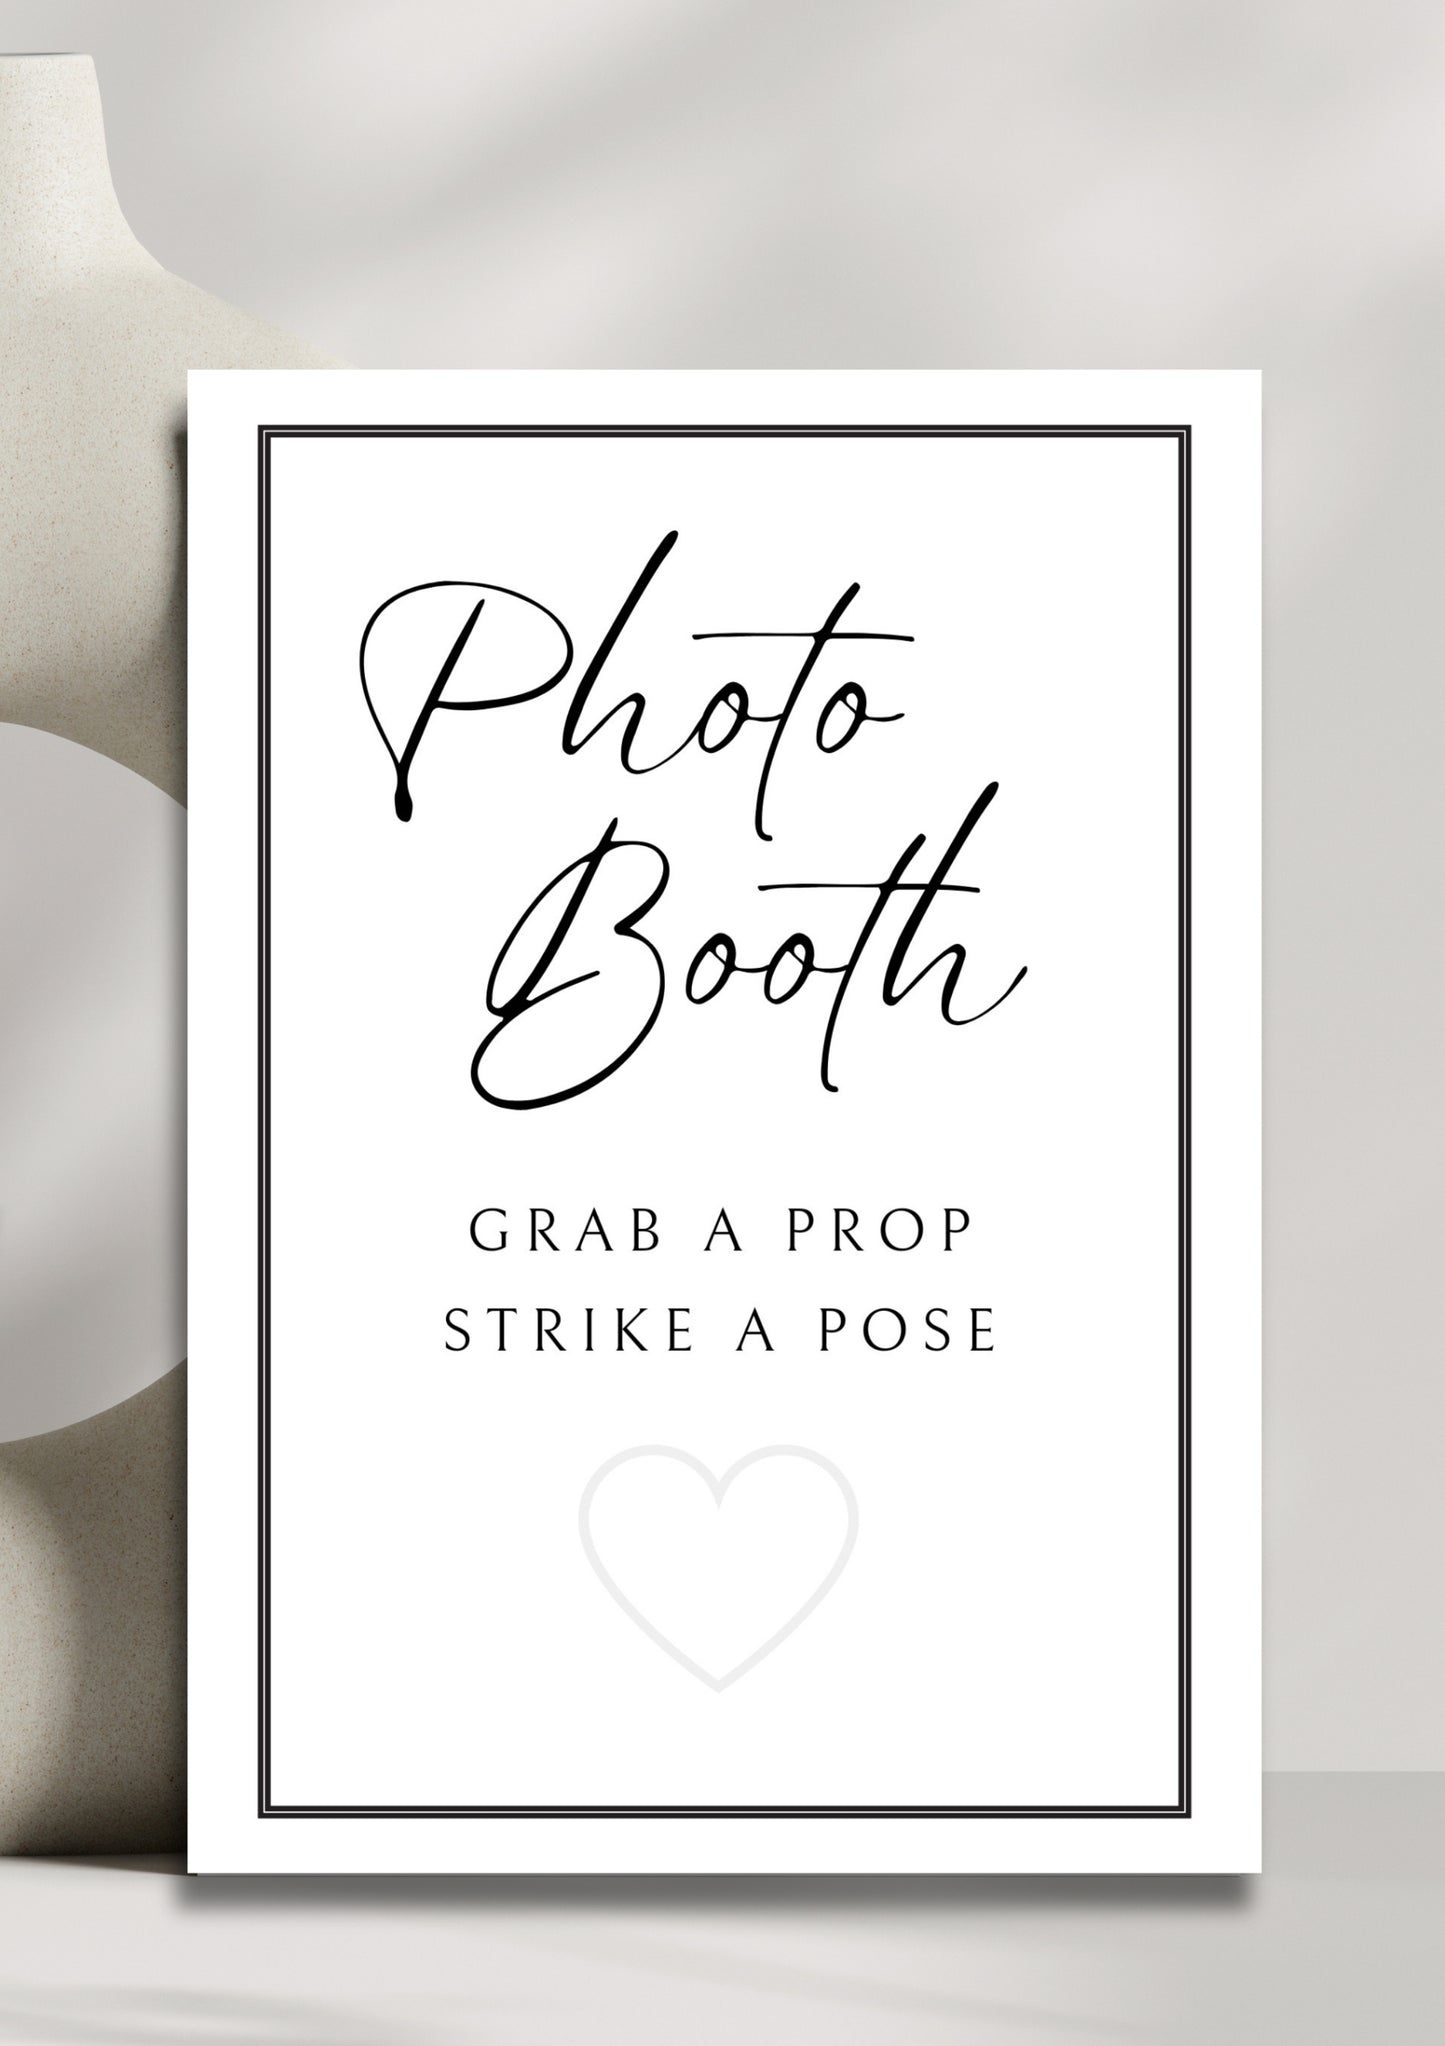 White stone collection - Photo booth sign